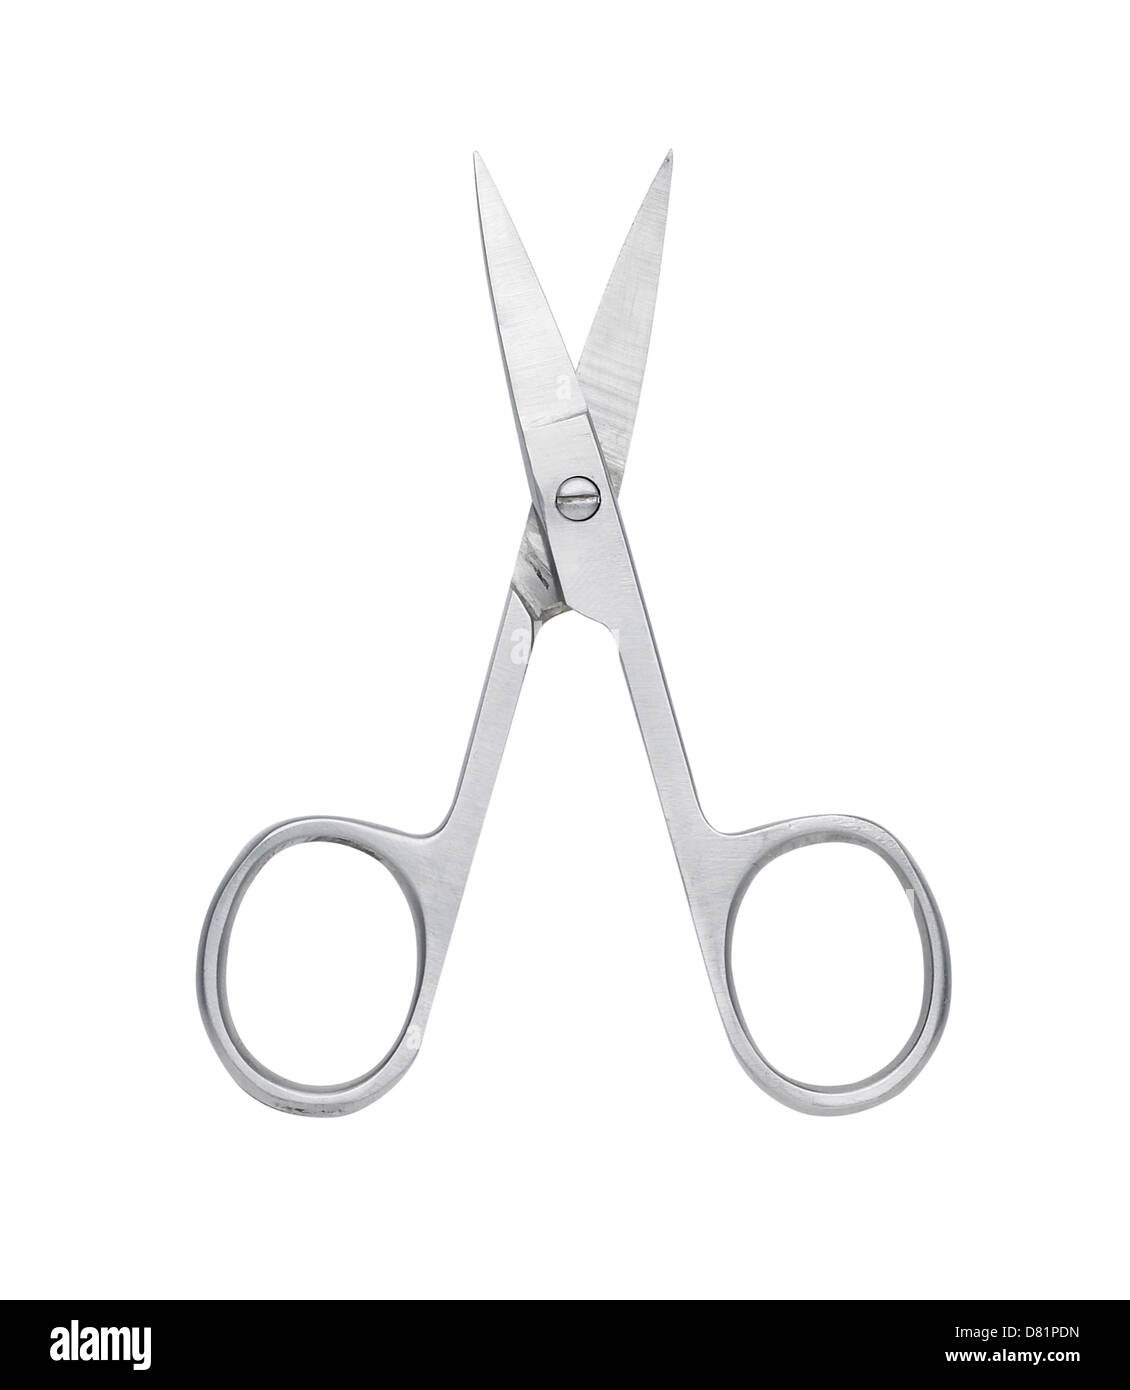 Pair of silver nail scissors cut out onto a white background Stock Photo